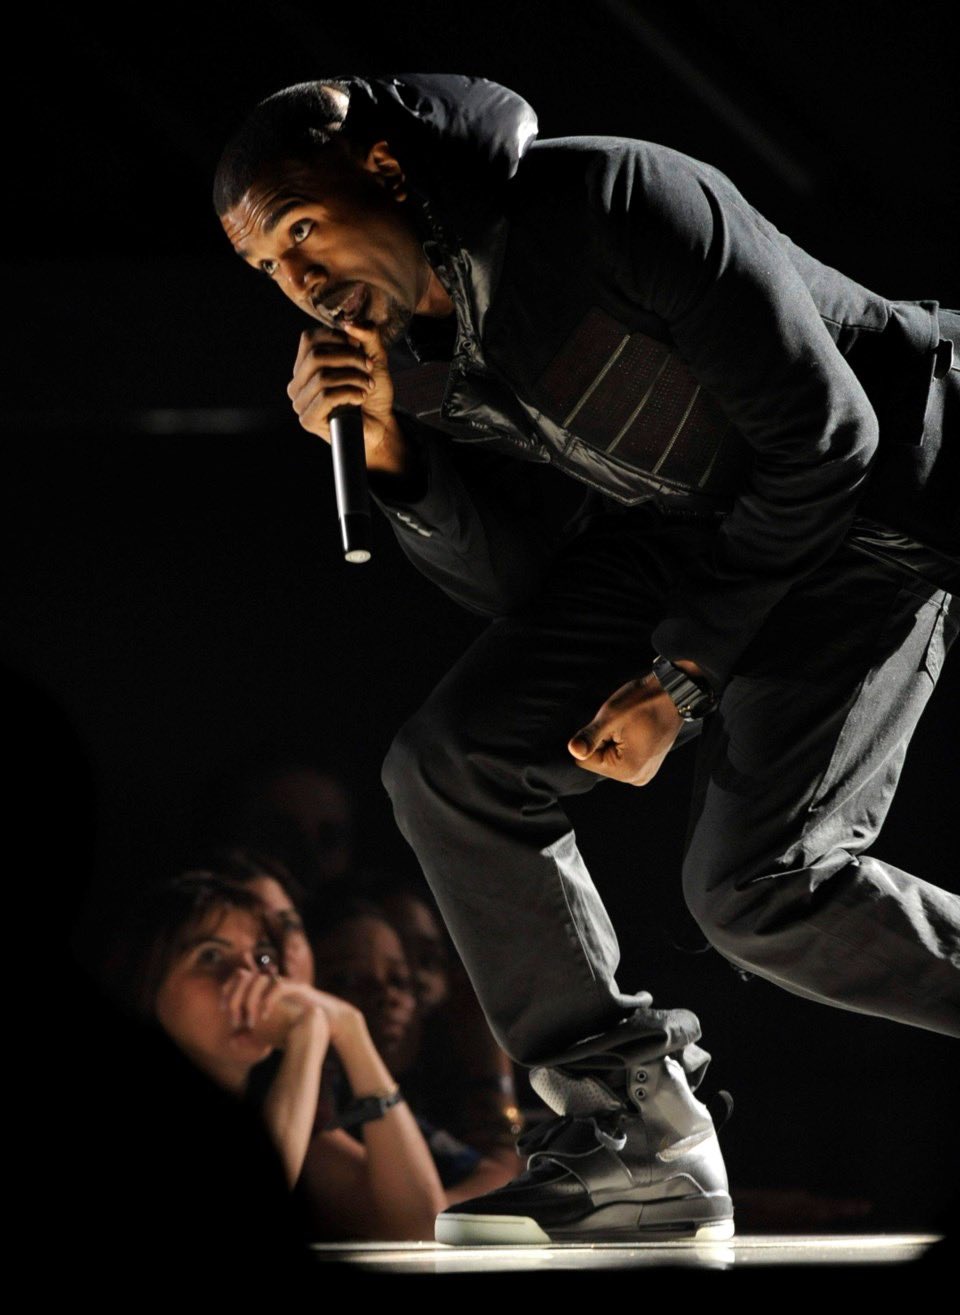 Kanye West during his performance at the Grammy 2008, wearing Nike Air Yeezy 1 Prototype